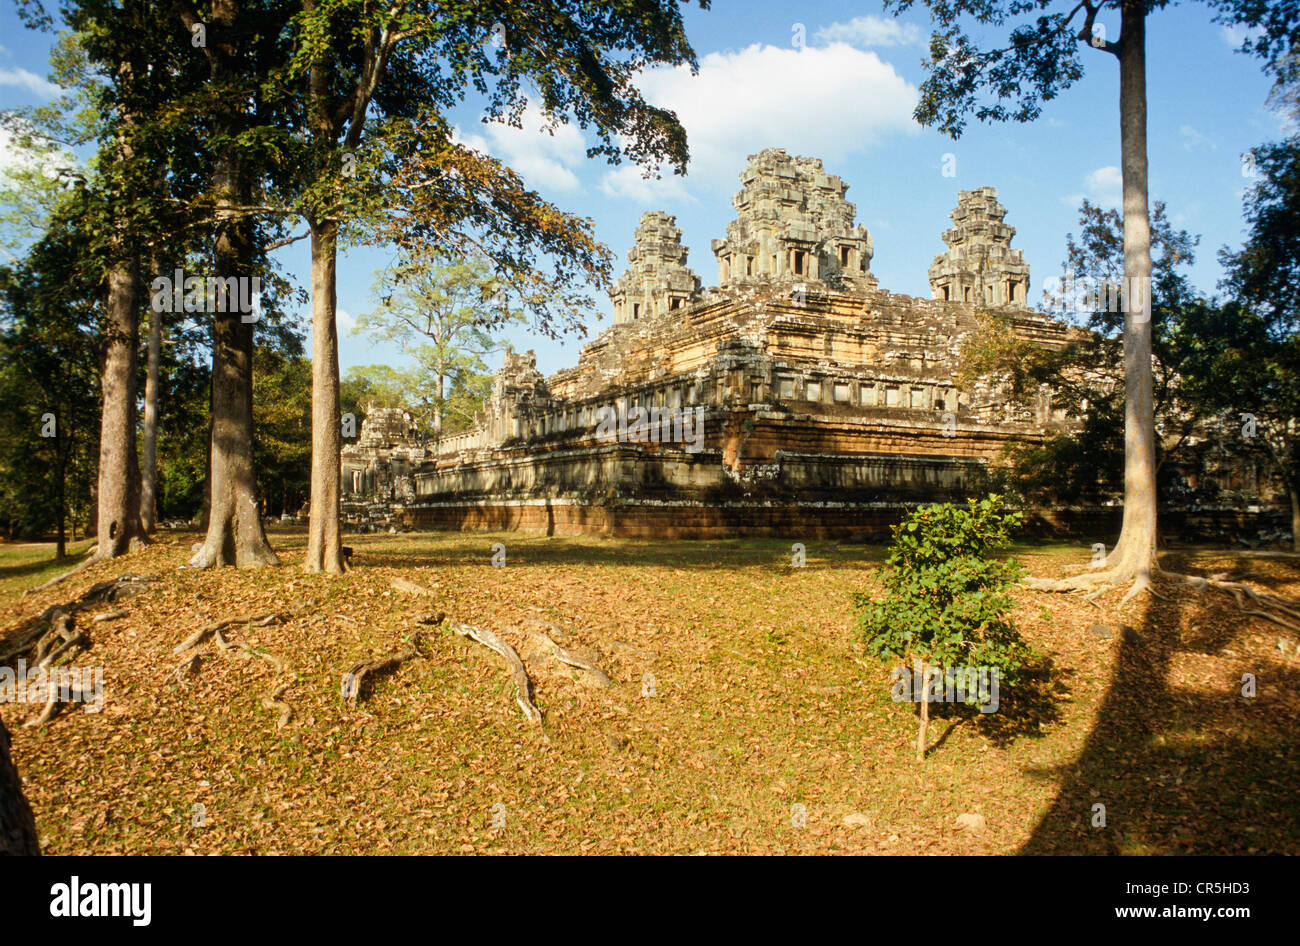 Pre Rup, huge monument east of Angkor Wat, Siem Reap, Cambodia, Southeast Asia Stock Photo